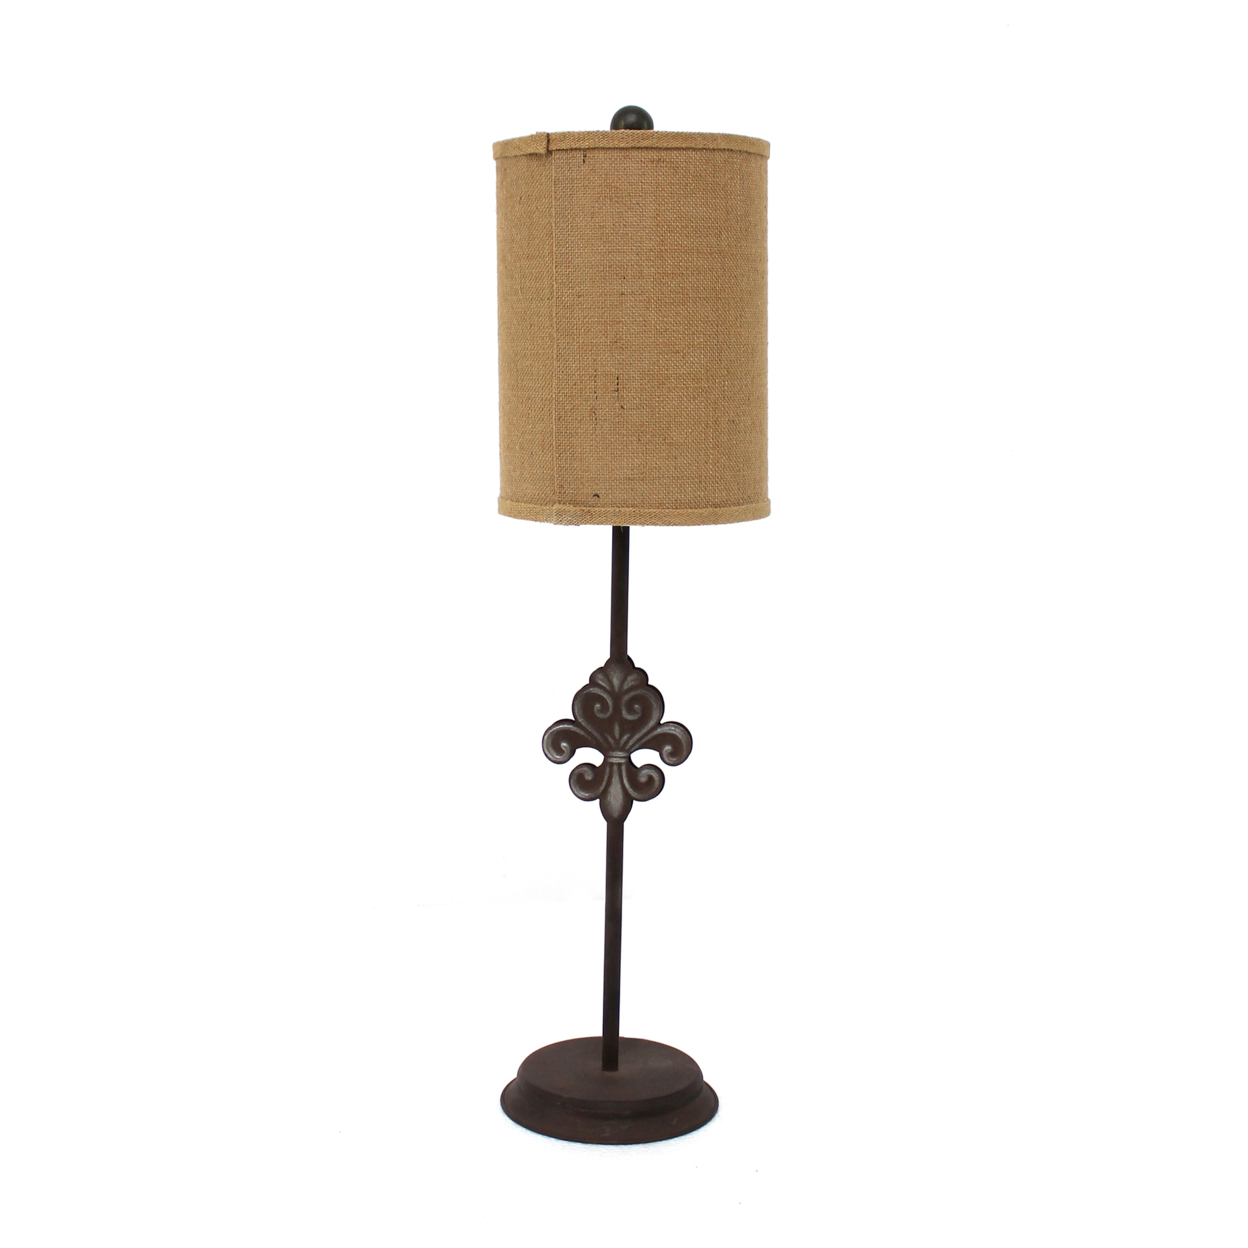 Metal Table Lamp With Cylindrical Drum Shade And Fleur De Lis Accent,Black- Saltoro Sherpi